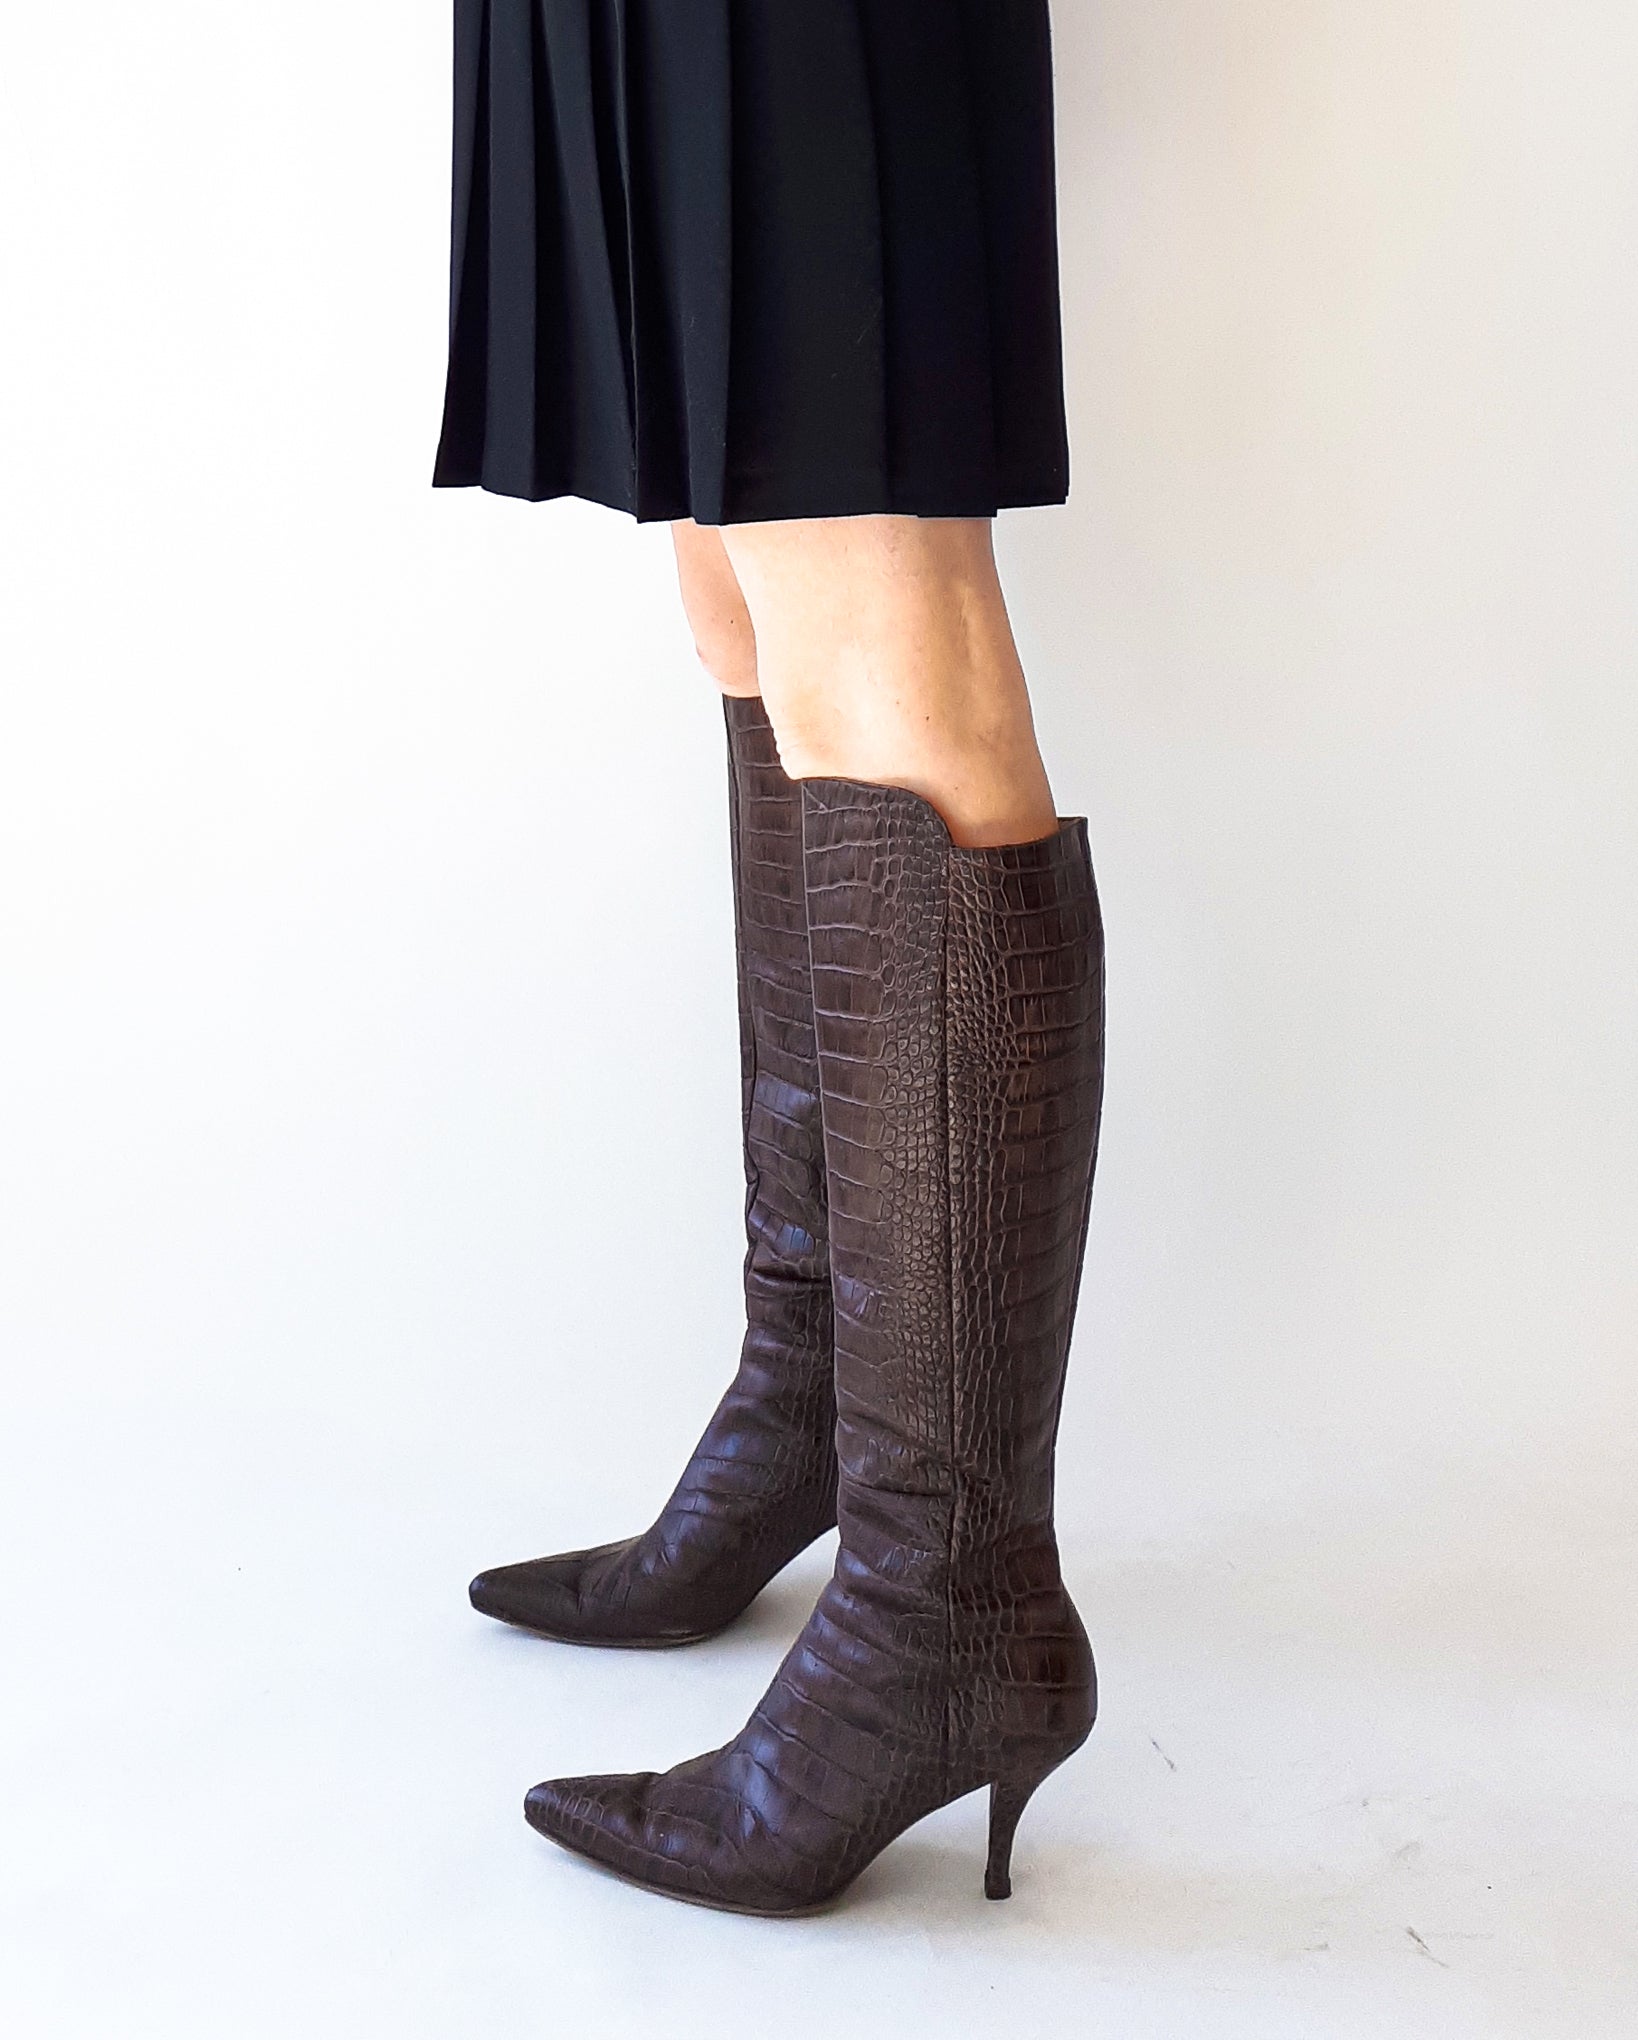 Y2K Vintage Kenneth Cole Tall Knee Boots Size 7 With Brown Leather Embossed Snake Skin Pointy Toe And Kitten Heel